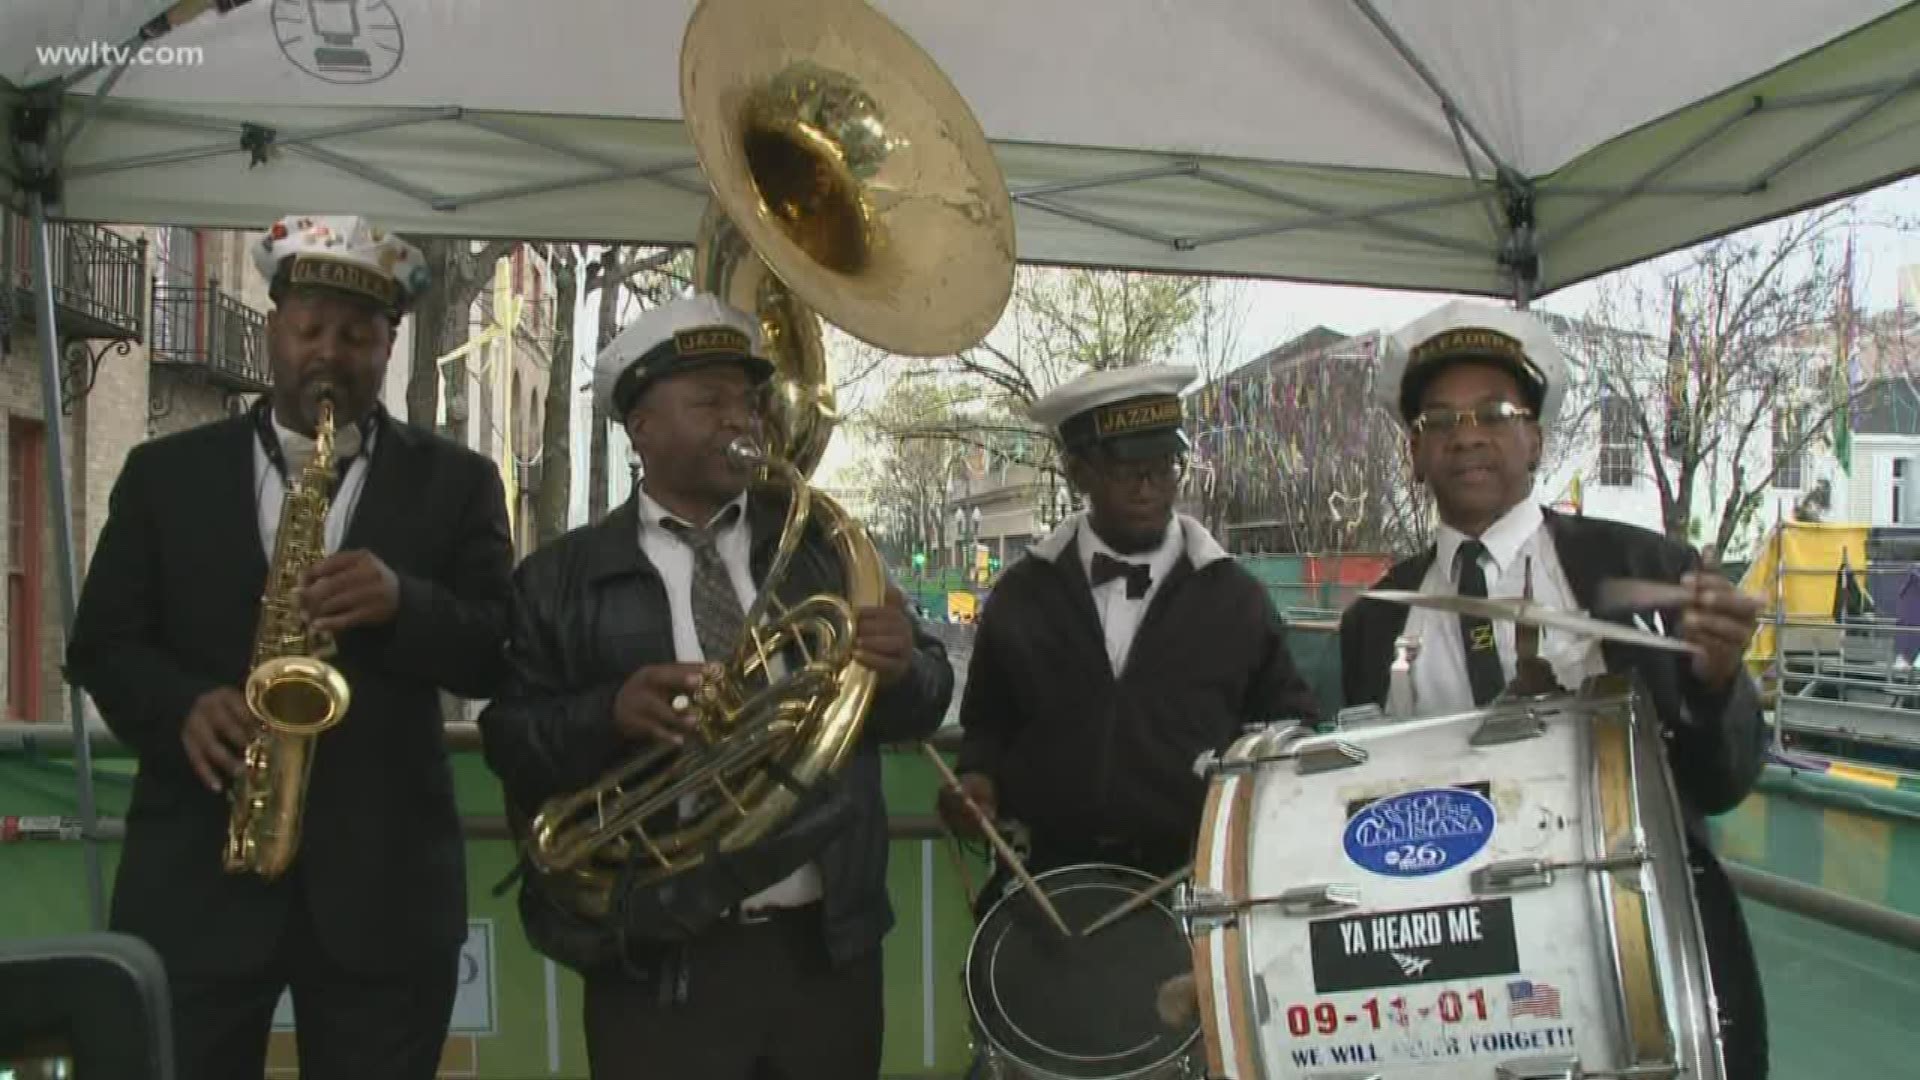 Check out the sounds of New Orleans ahead of the Krewe of Zulu parade downtown on St. Charles Avenue!